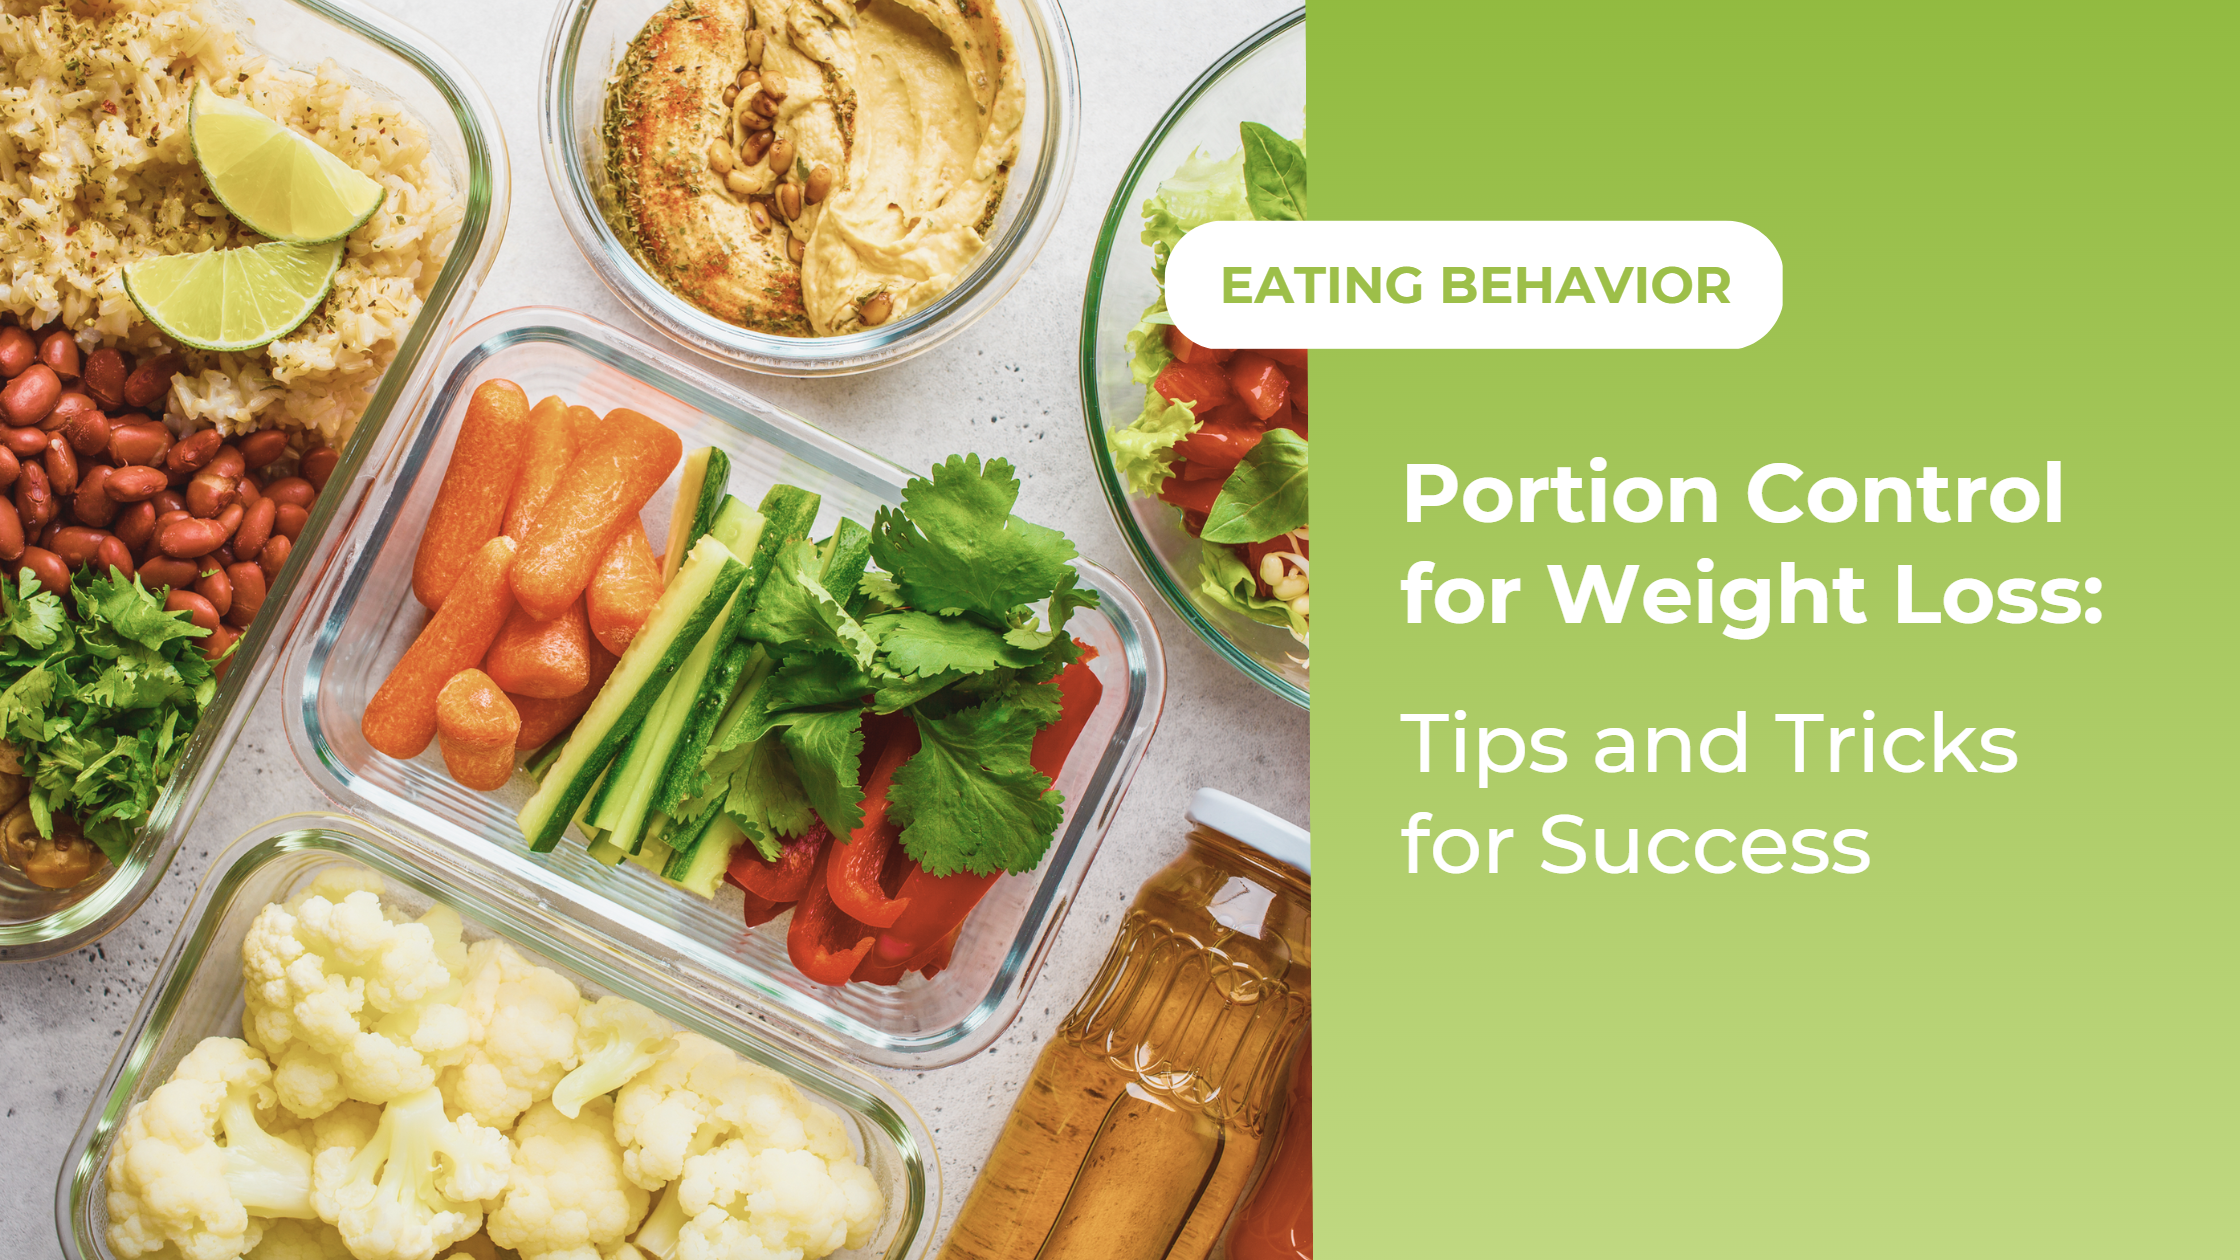 How to Lose Weight on a Portion Control Diet